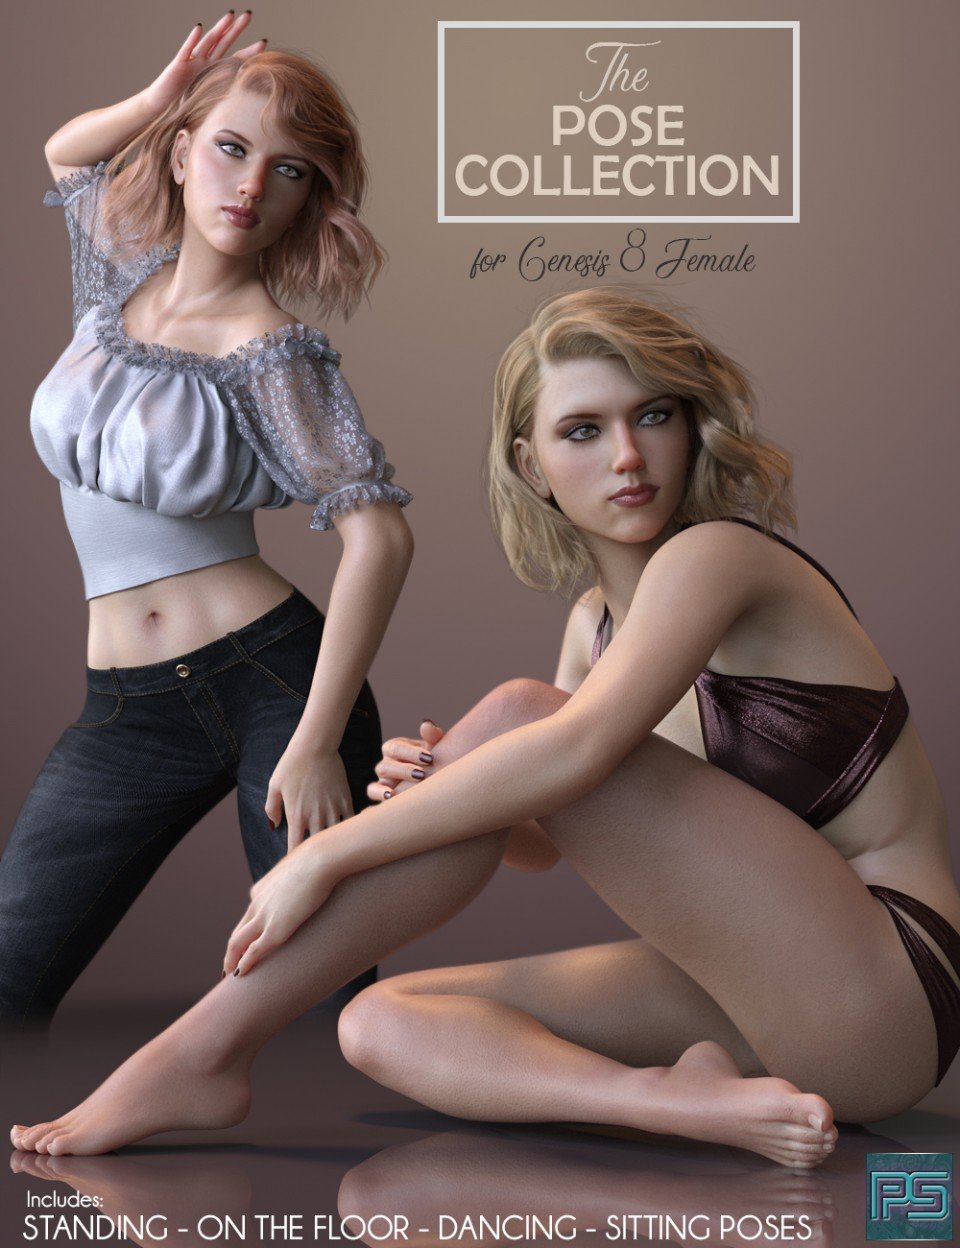 The Pose Collection for Genesis 8 Female